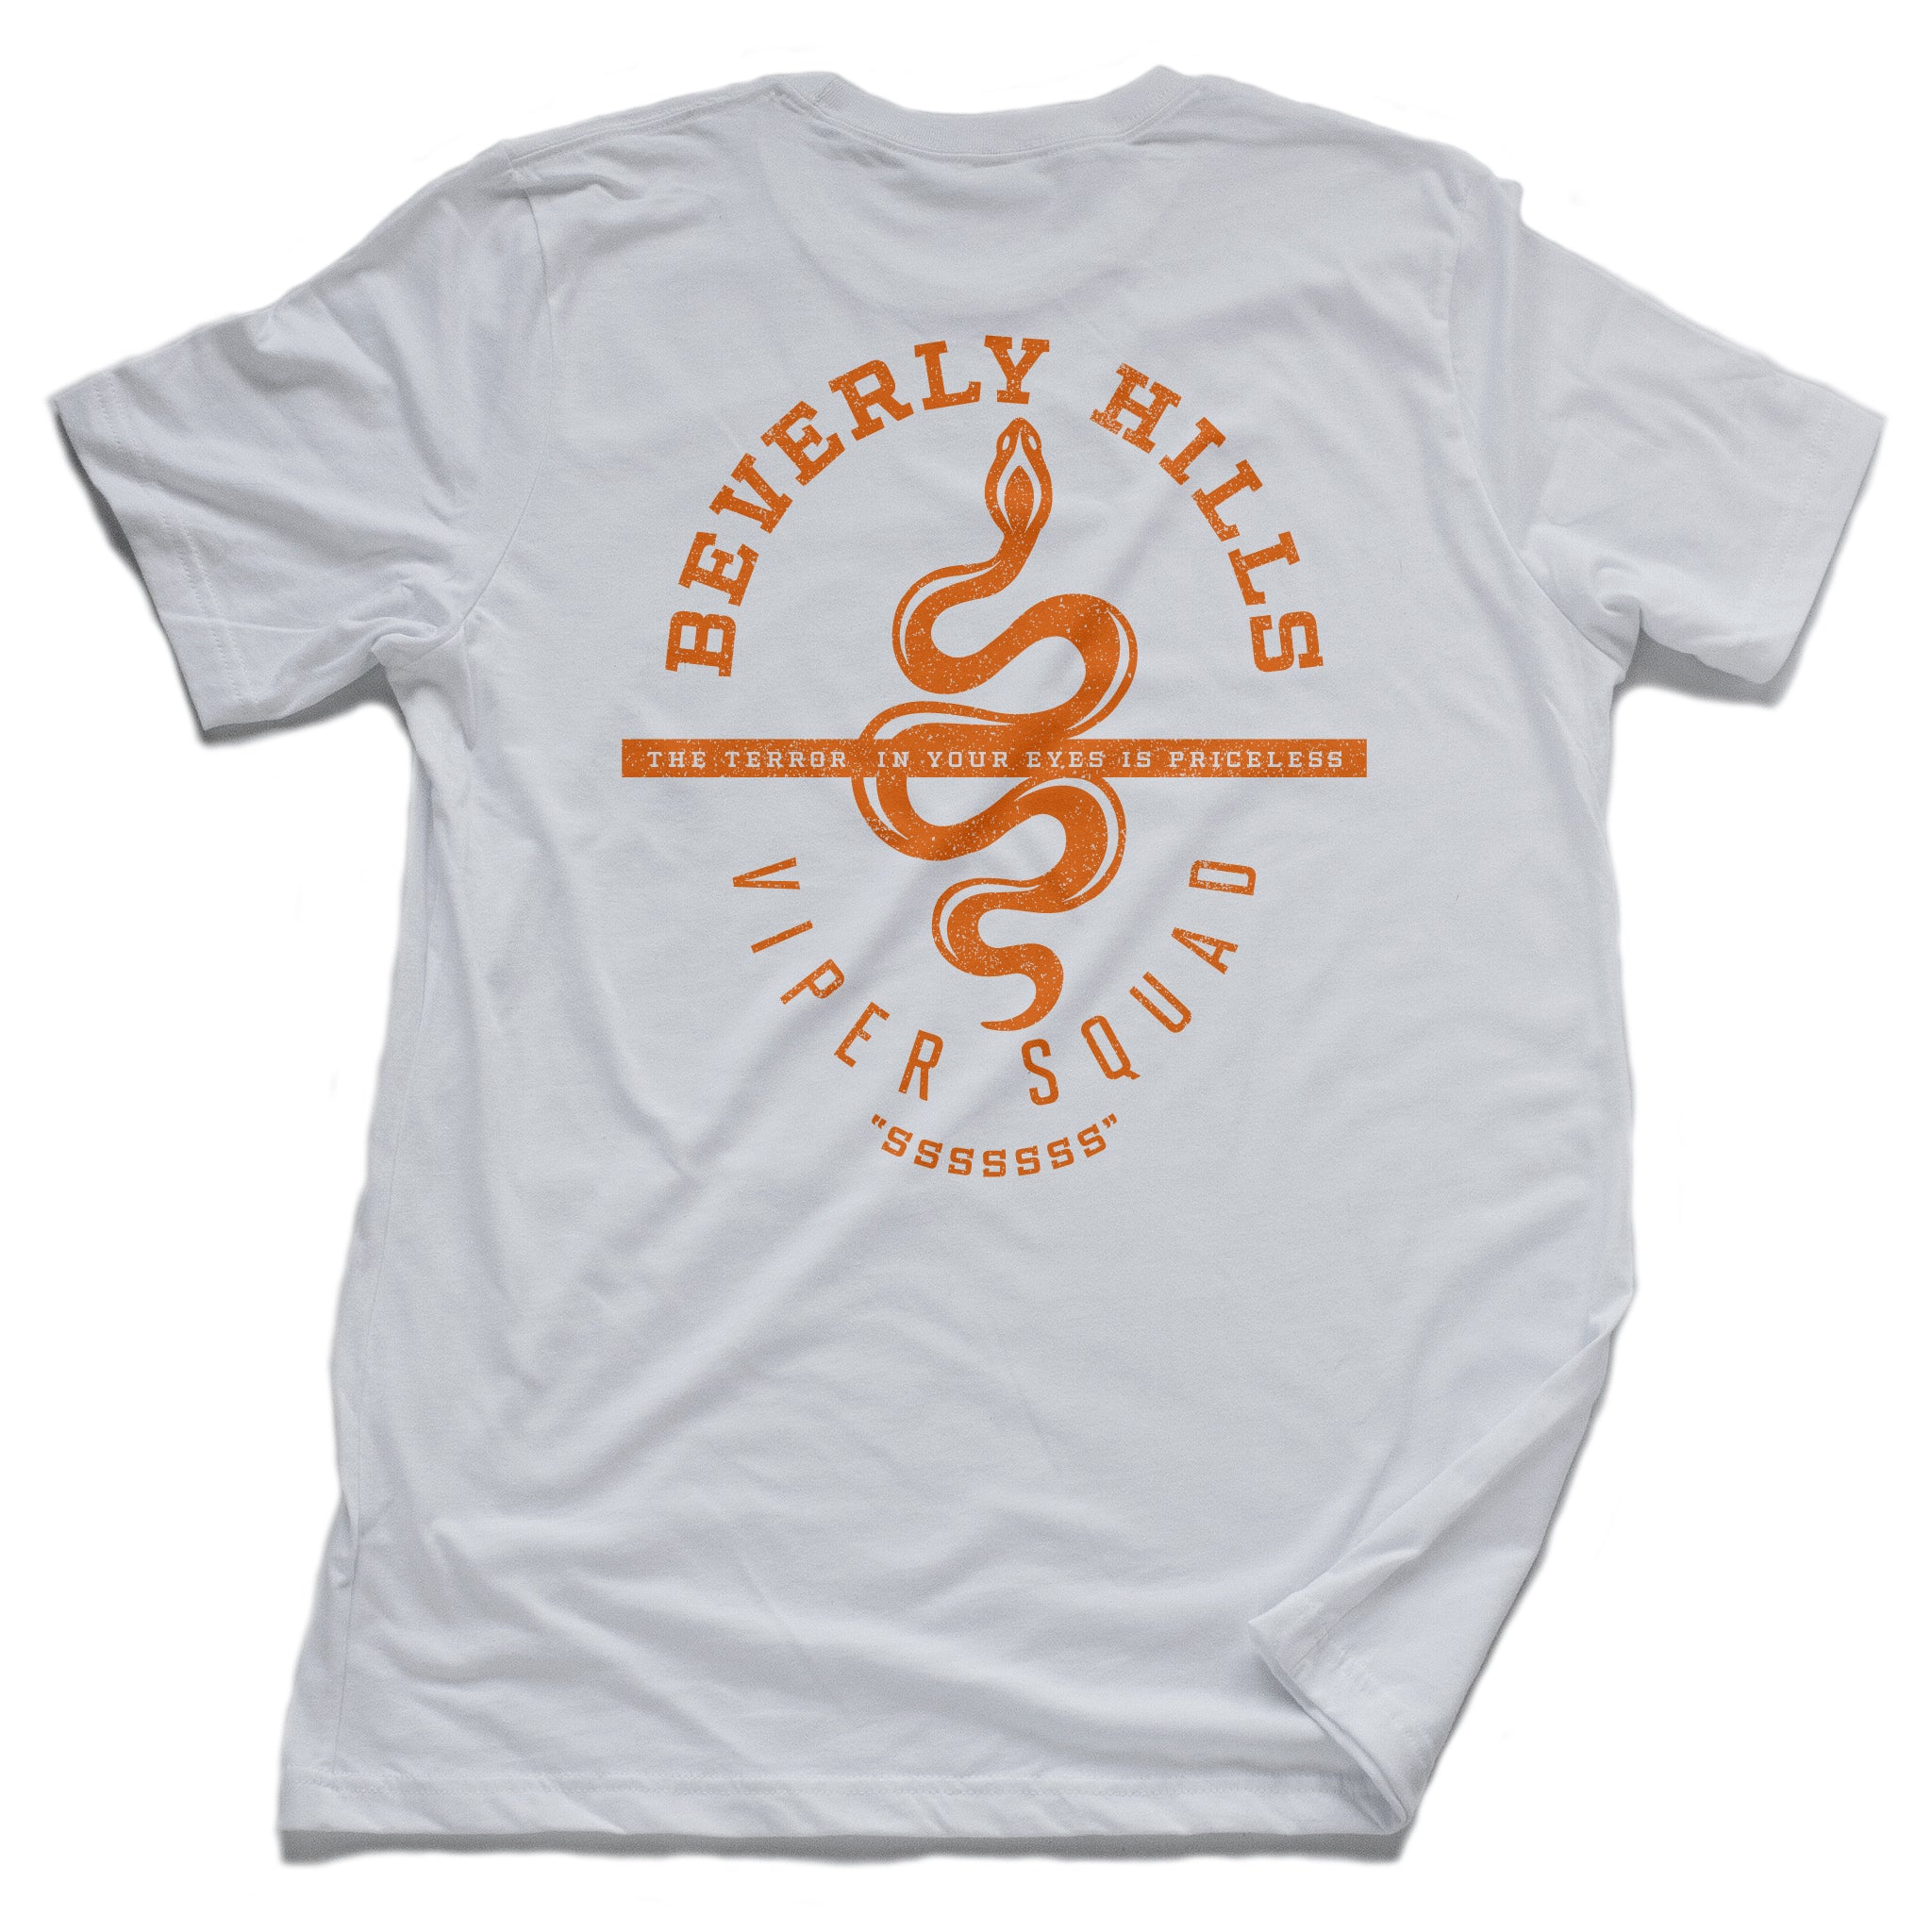 Retro, vintage-inspired sarcastic fashion t-shirt with a graphic design snake (viper), for a fictional club or gang in Beverly Hills, California. From the brand Ruston/Bond. From wolfsaint.net